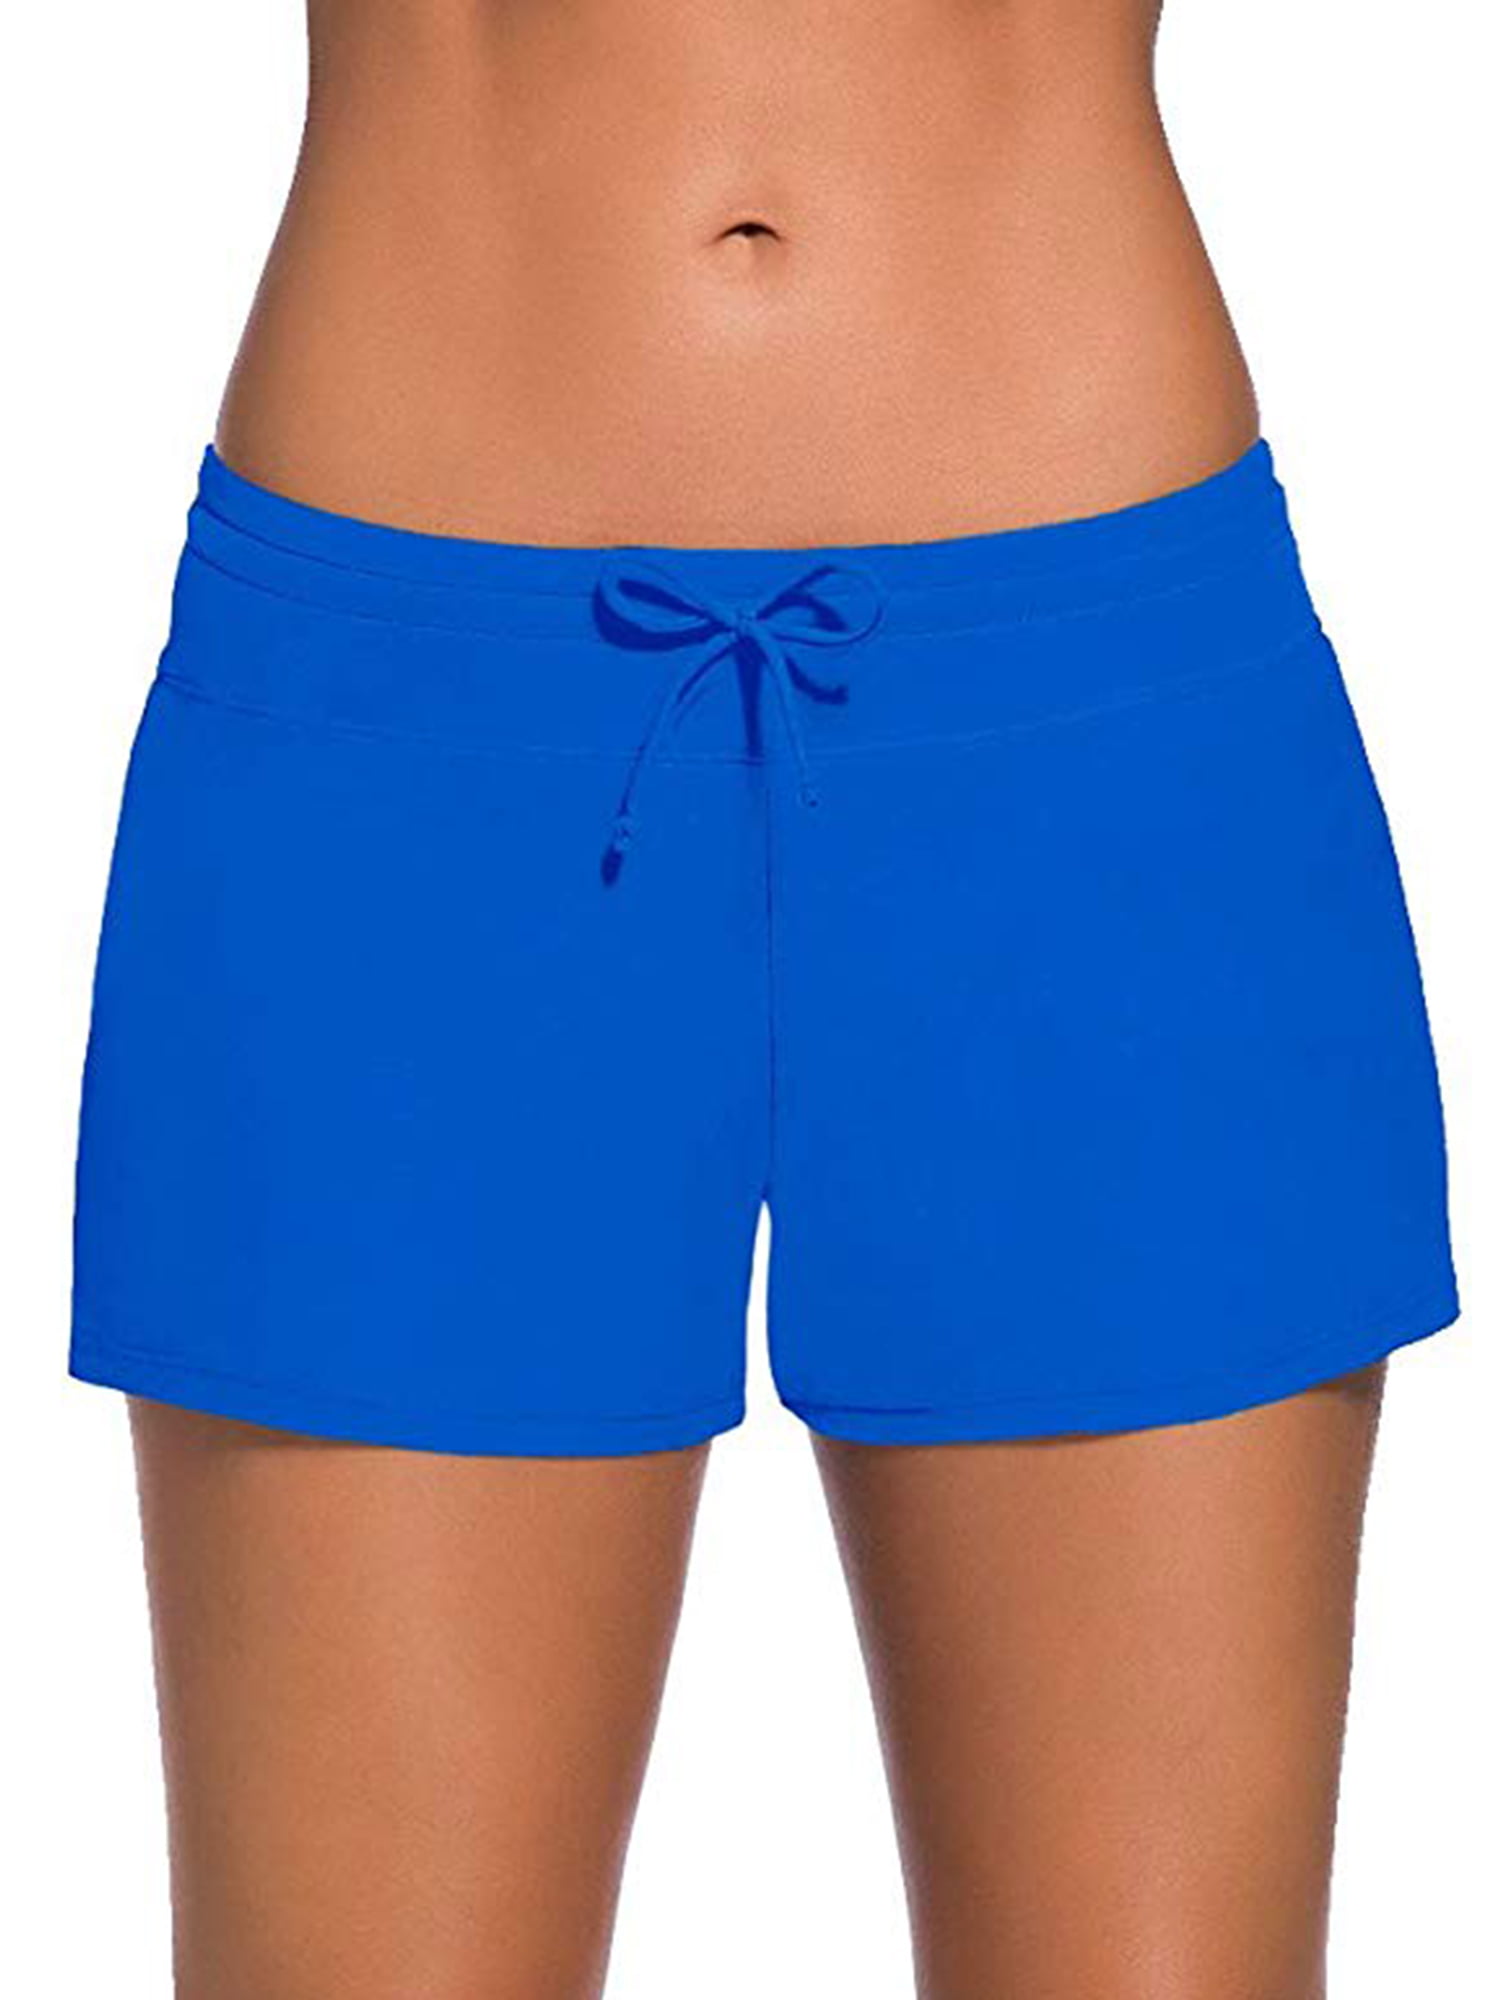 DH-MS Dress Closeup Violet Quick Dry Elastic Lace Boardshorts Beach Shorts Pants Swim Trunks Male Swimsuit with Pockets